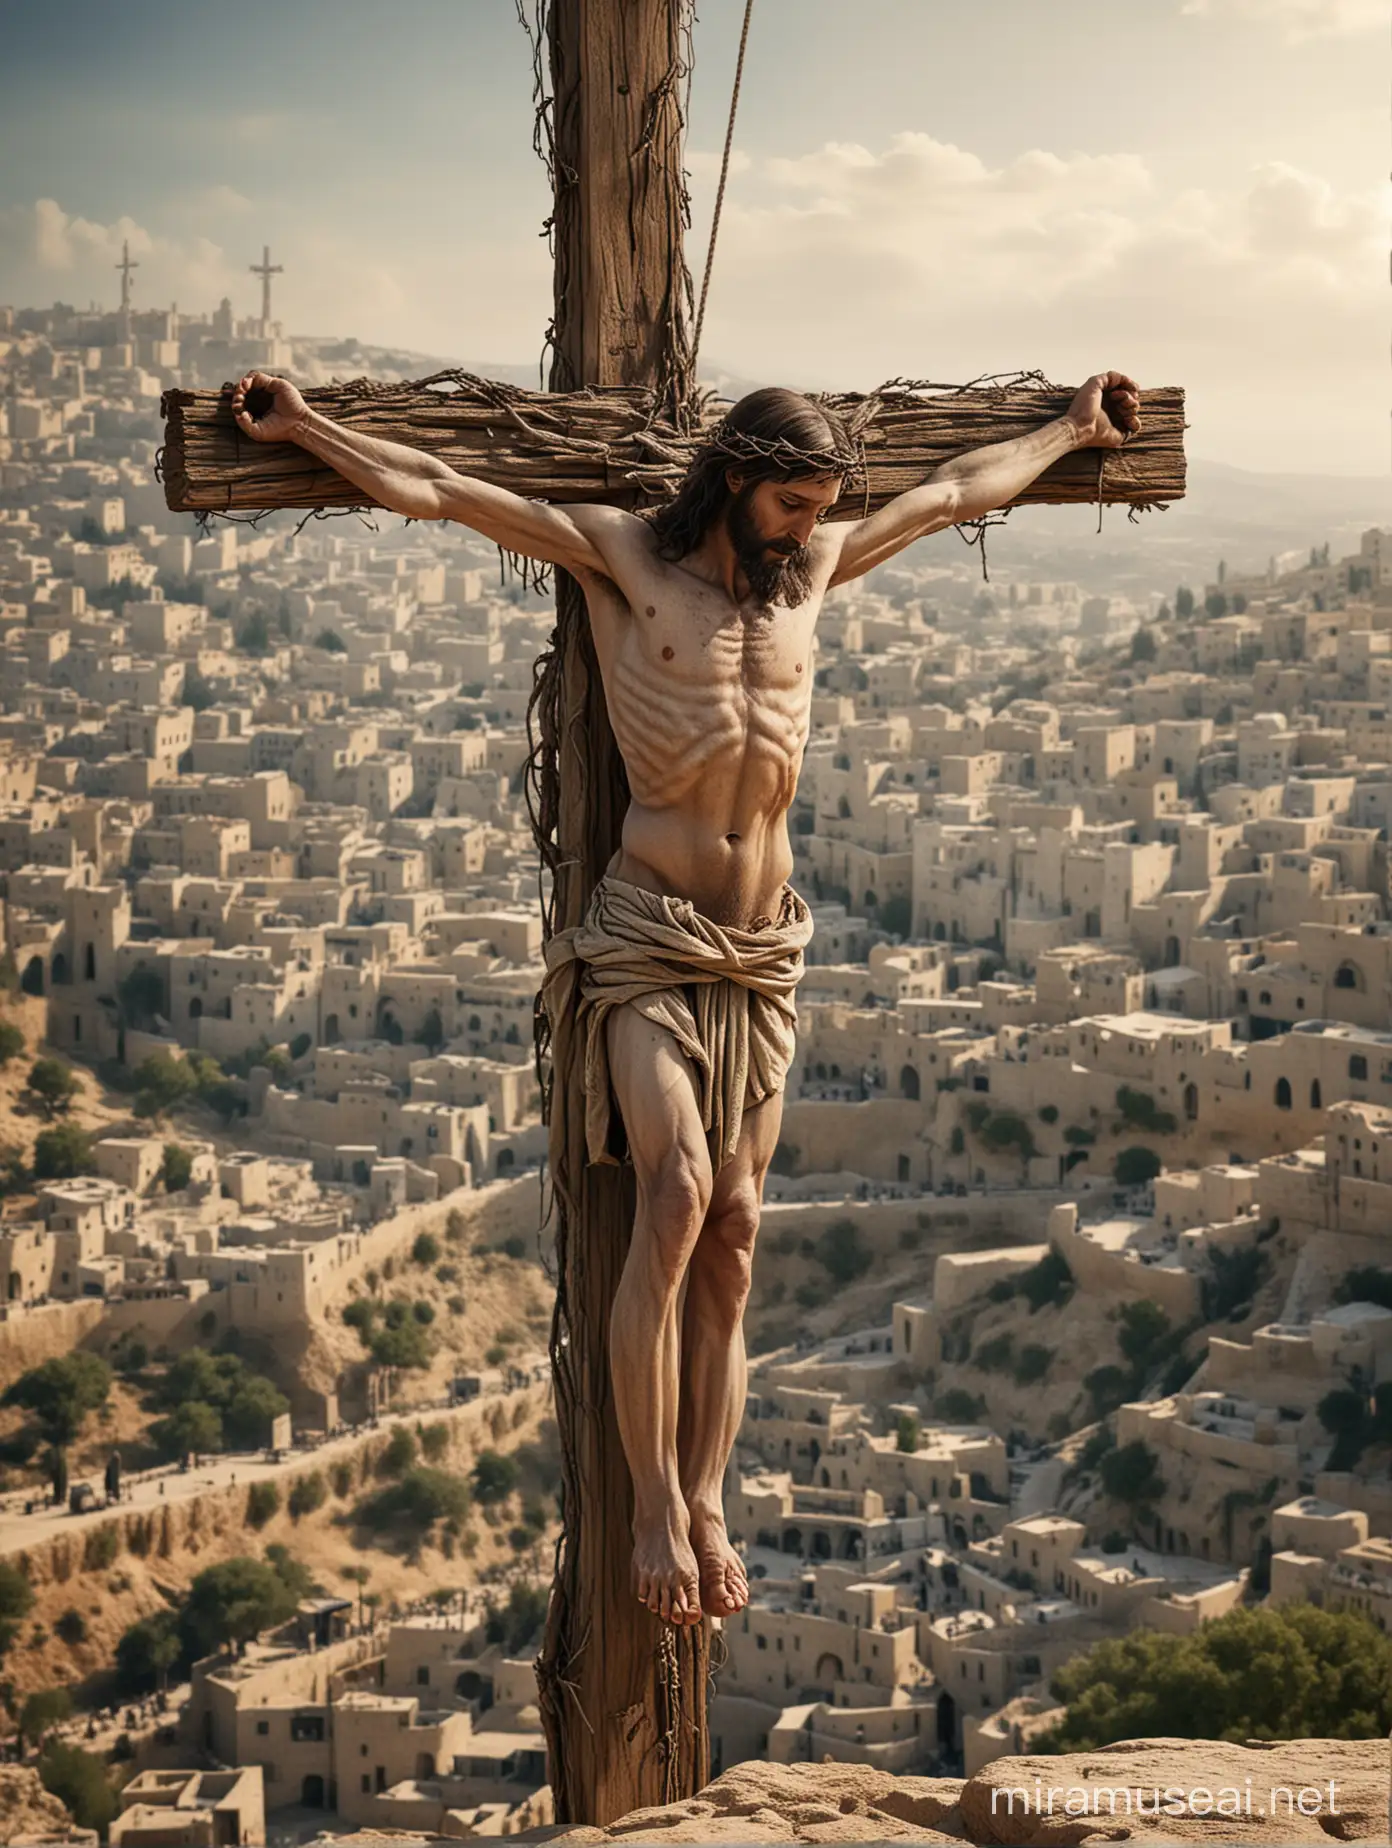 Jesus Christ hanging on the cross on the hill of Golgotha, Jerusalem. On Jesus, the subject, include hyper-realistic human skin textures